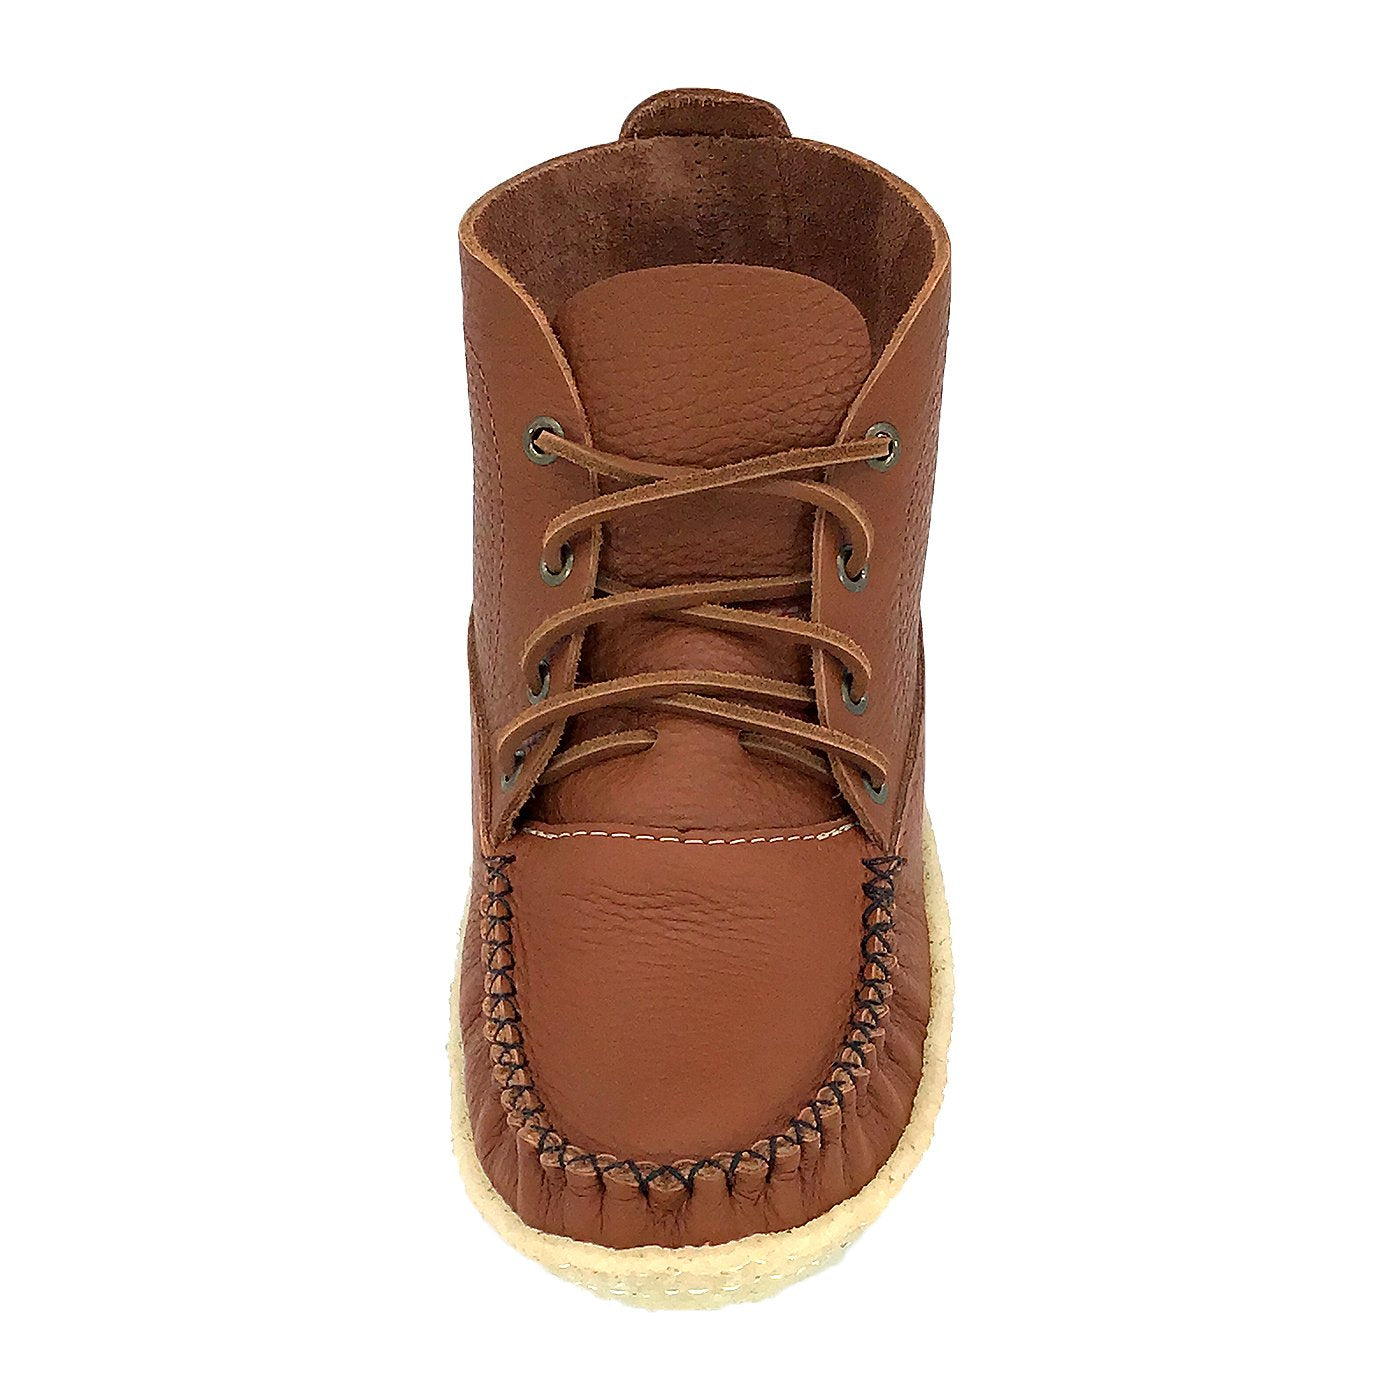 Men's Ankle Moccasin Boots